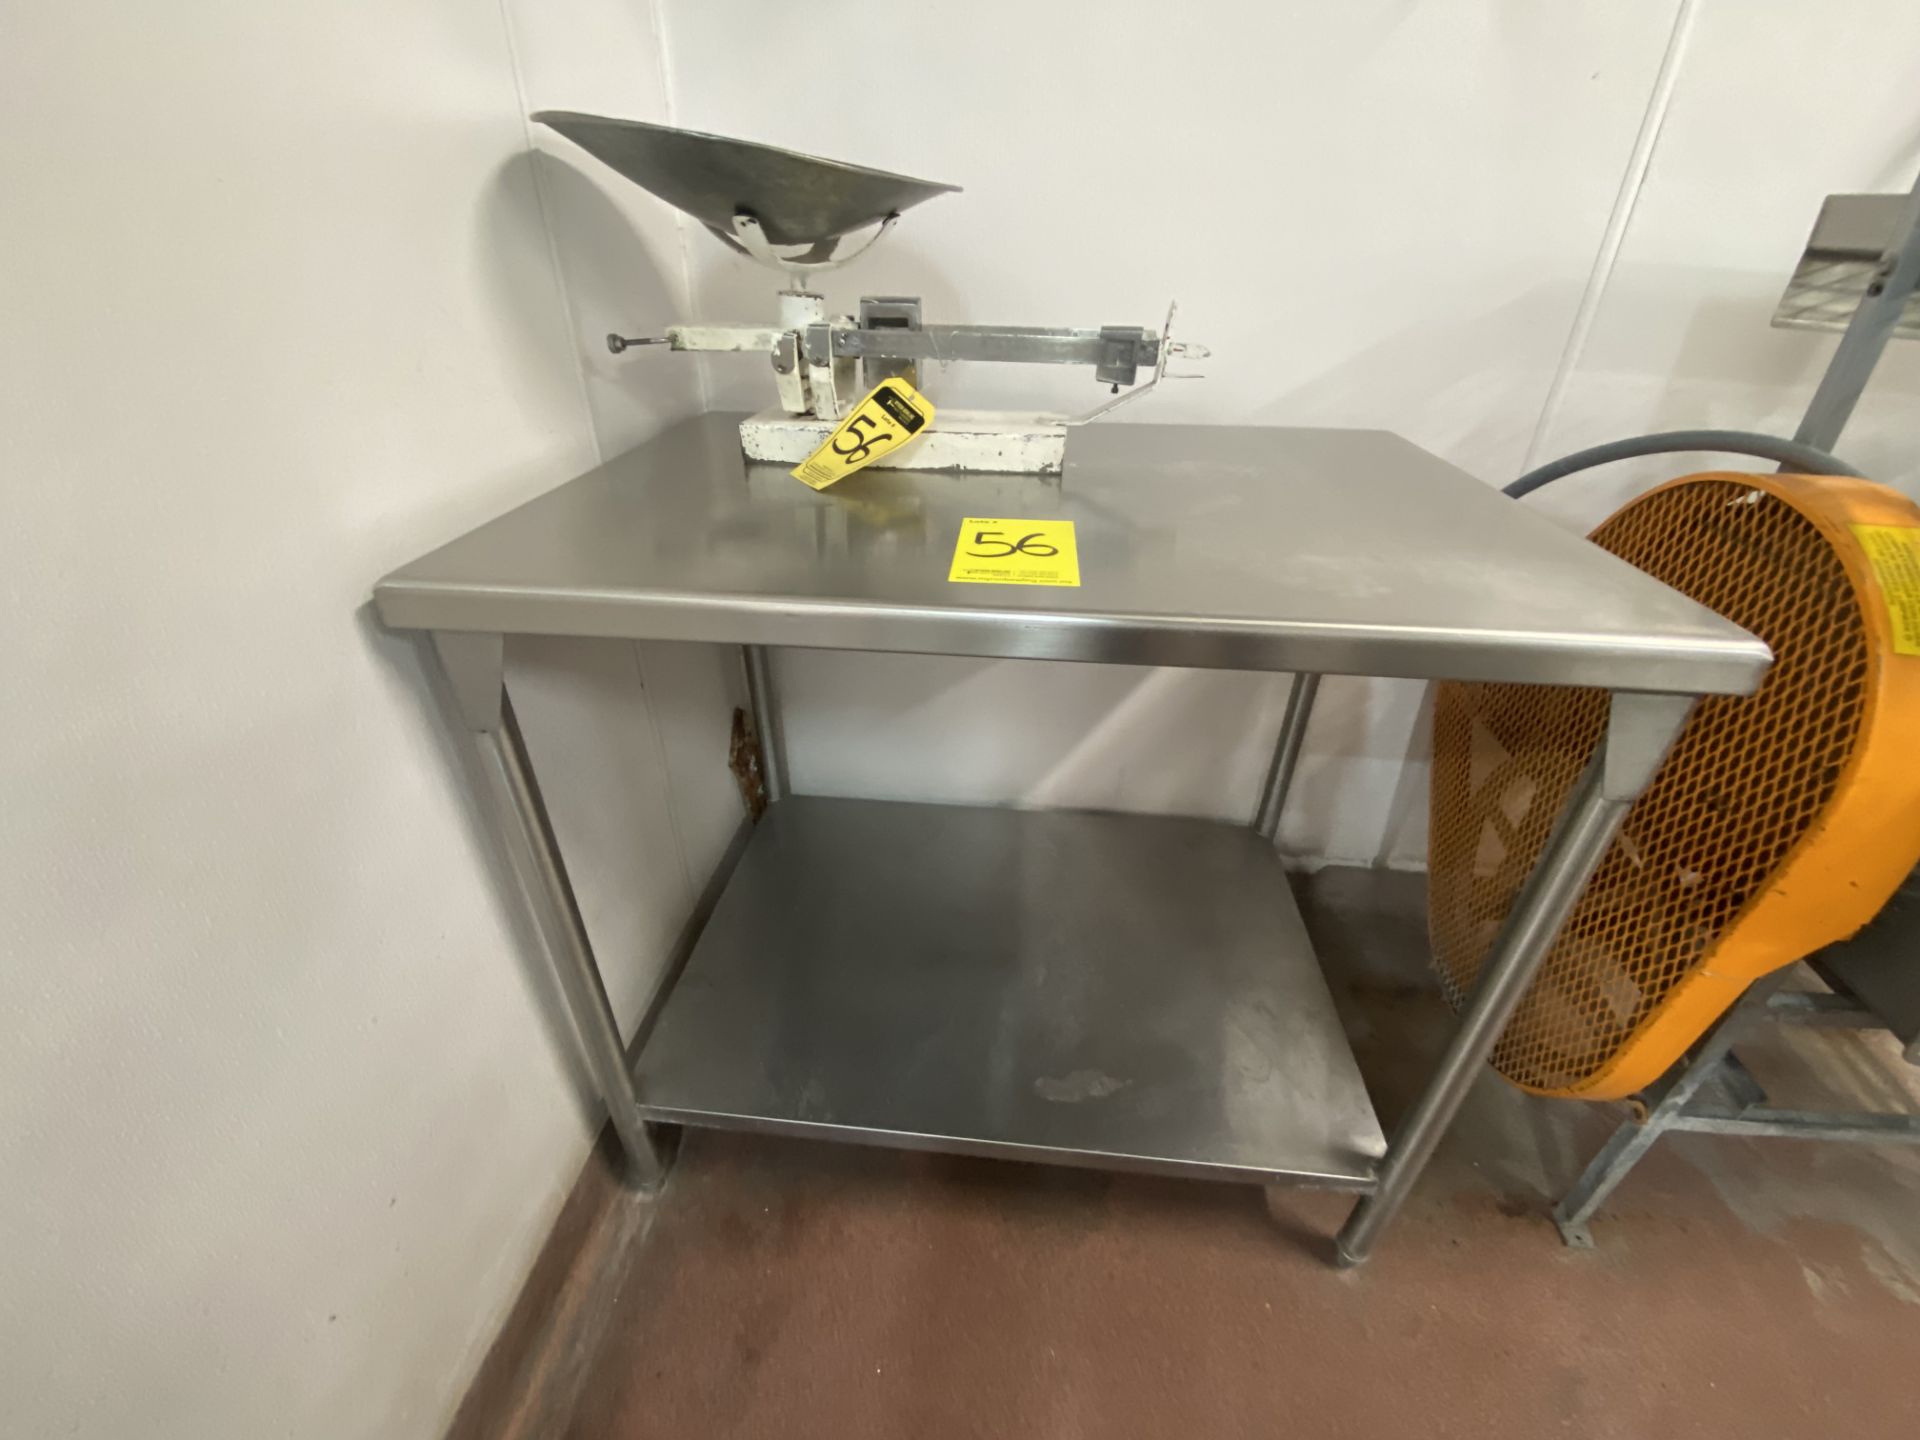 1 Stainless steel work table measures 1.00 x 0.70 x 0.90 meters; Includes balance scale - Image 2 of 5